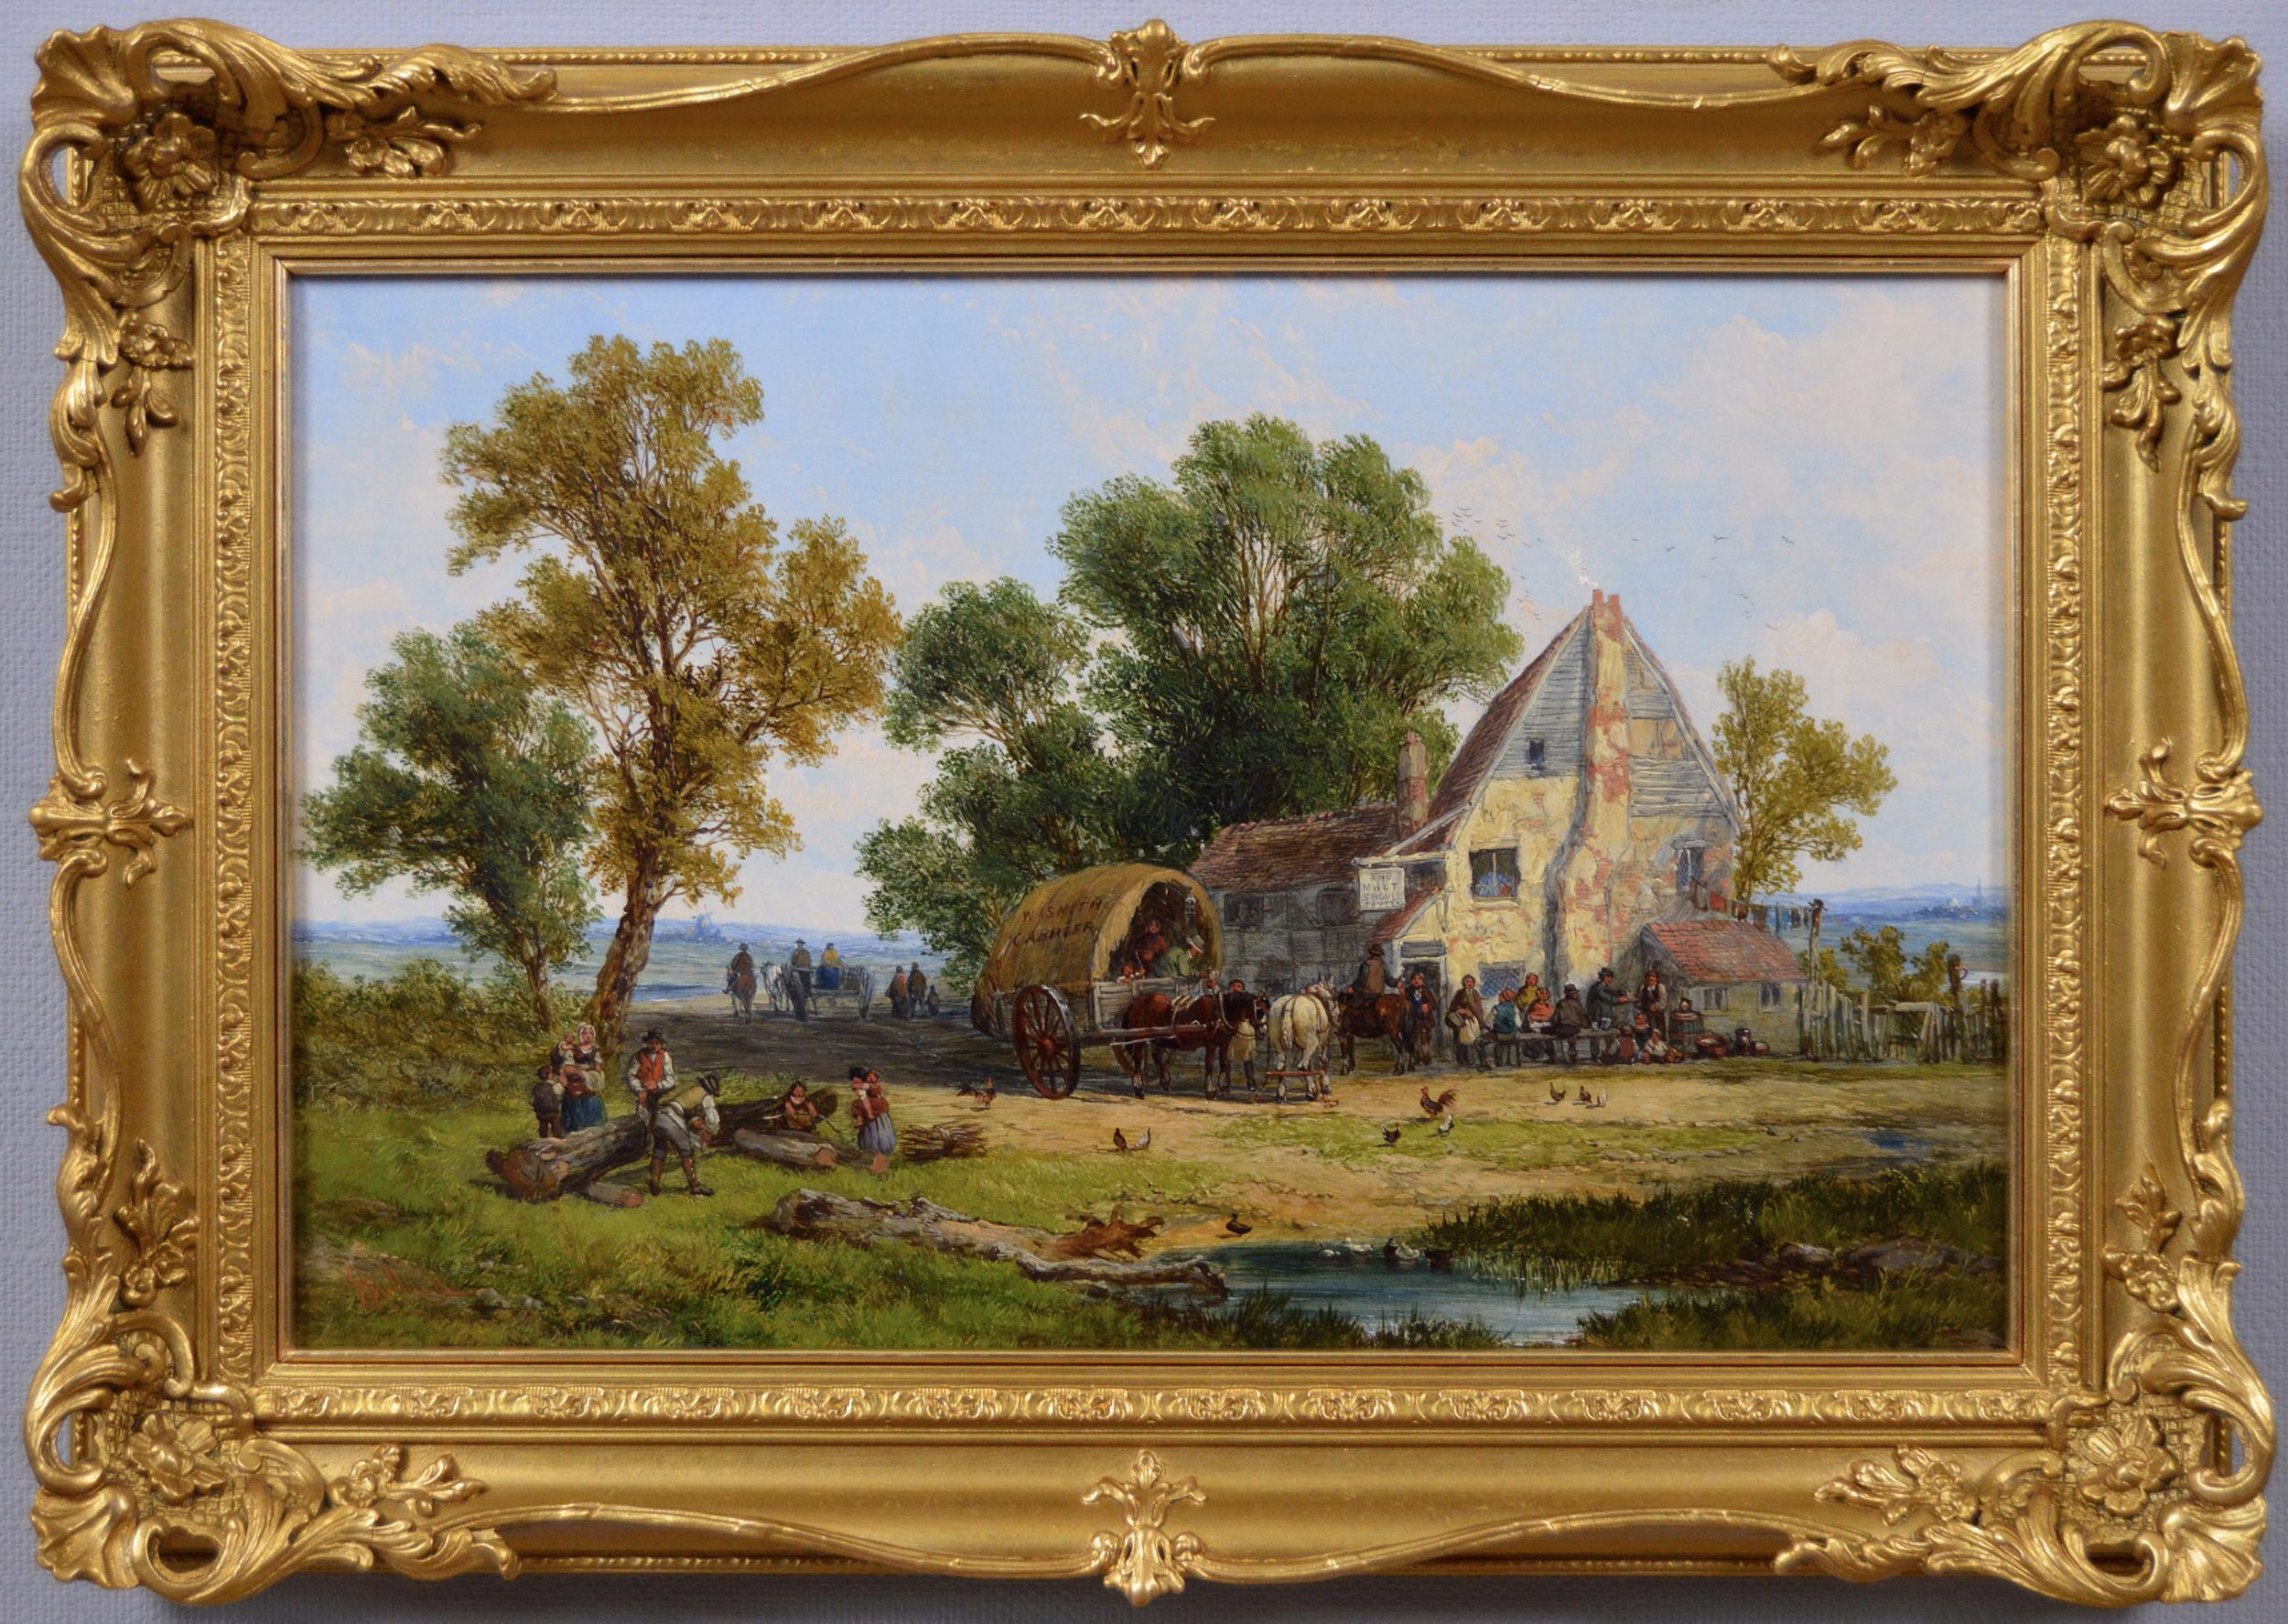 19th century landscape oil painting of a village tavern